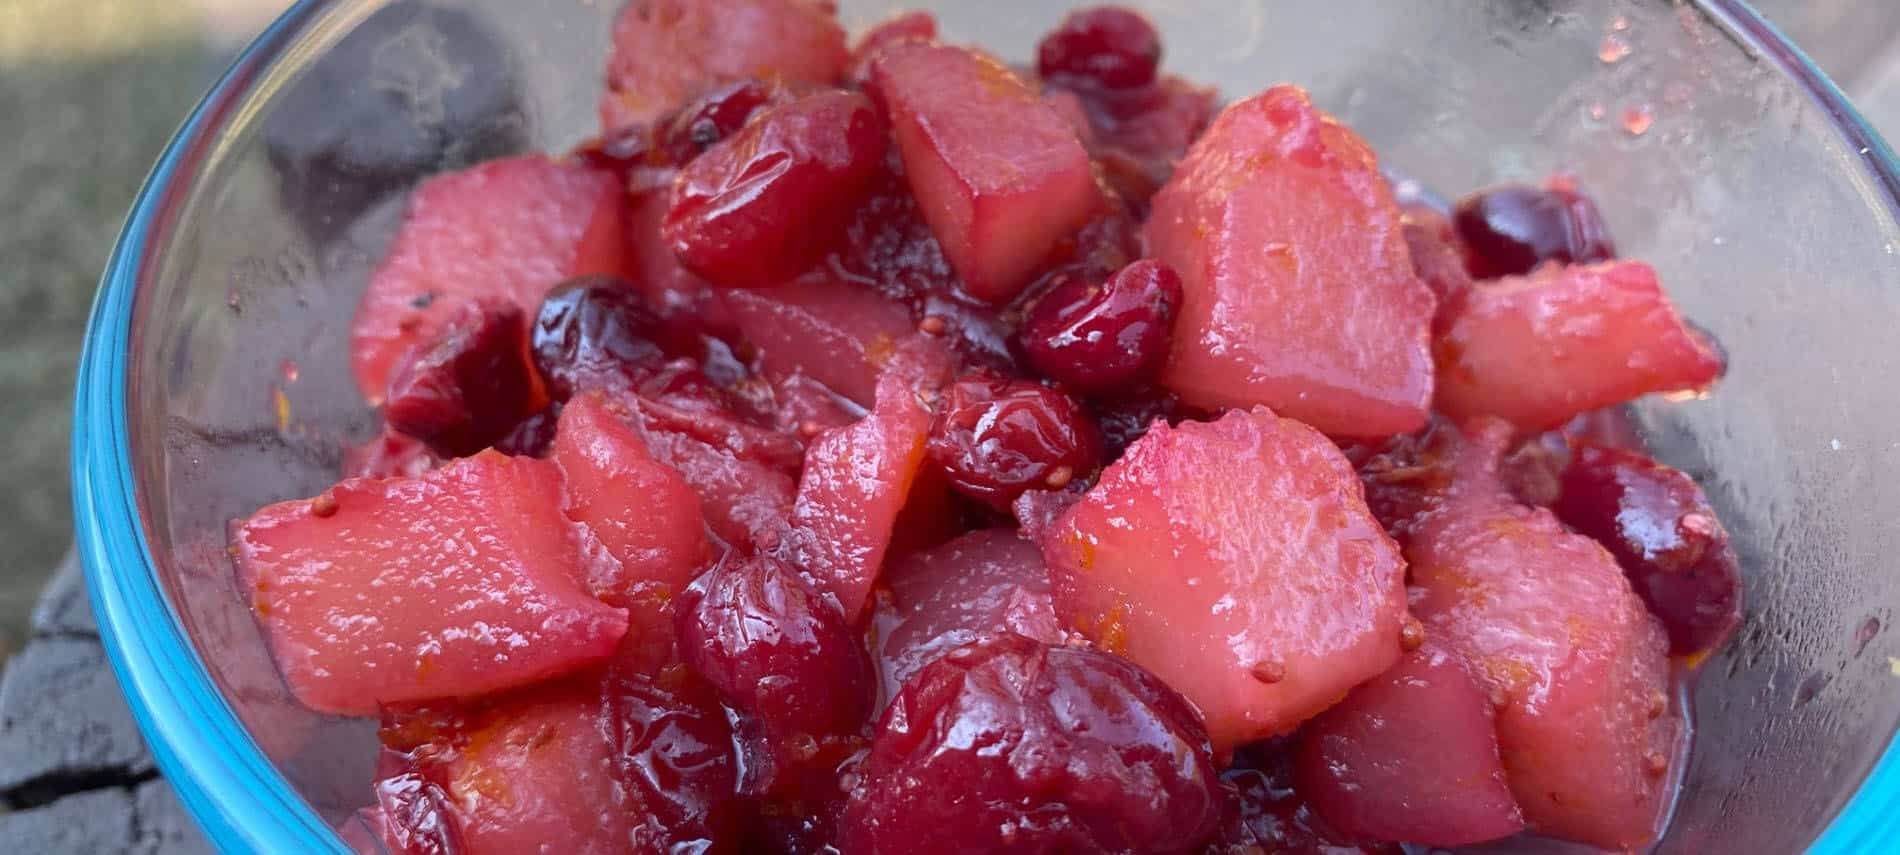 Chunku Pears, Bright red cranberries, in a red cranberry and pear sauce